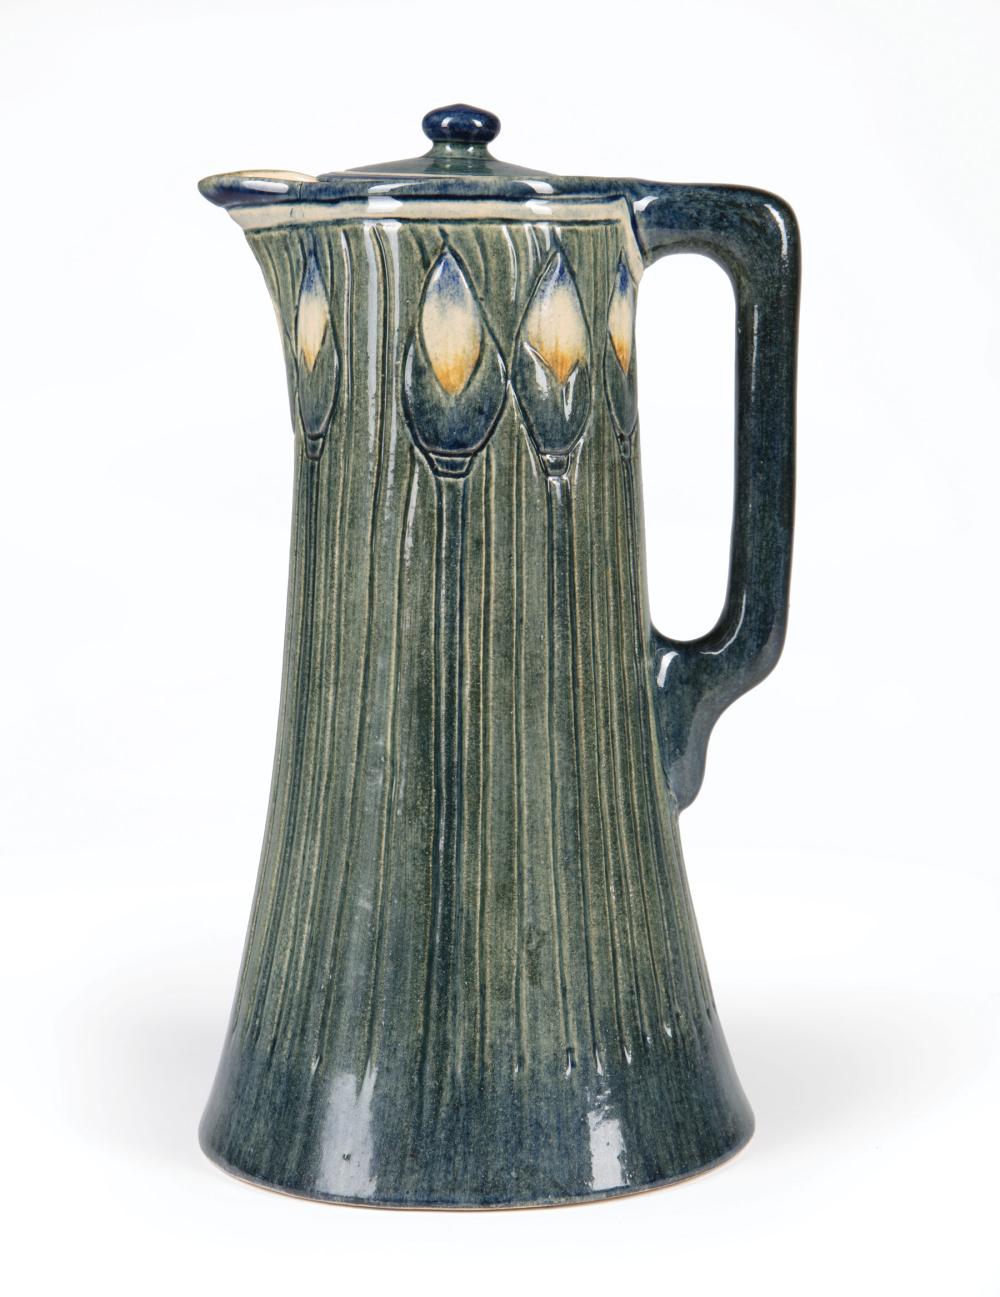 NEWCOMB COLLEGE ART POTTERY HIGH 31bf31